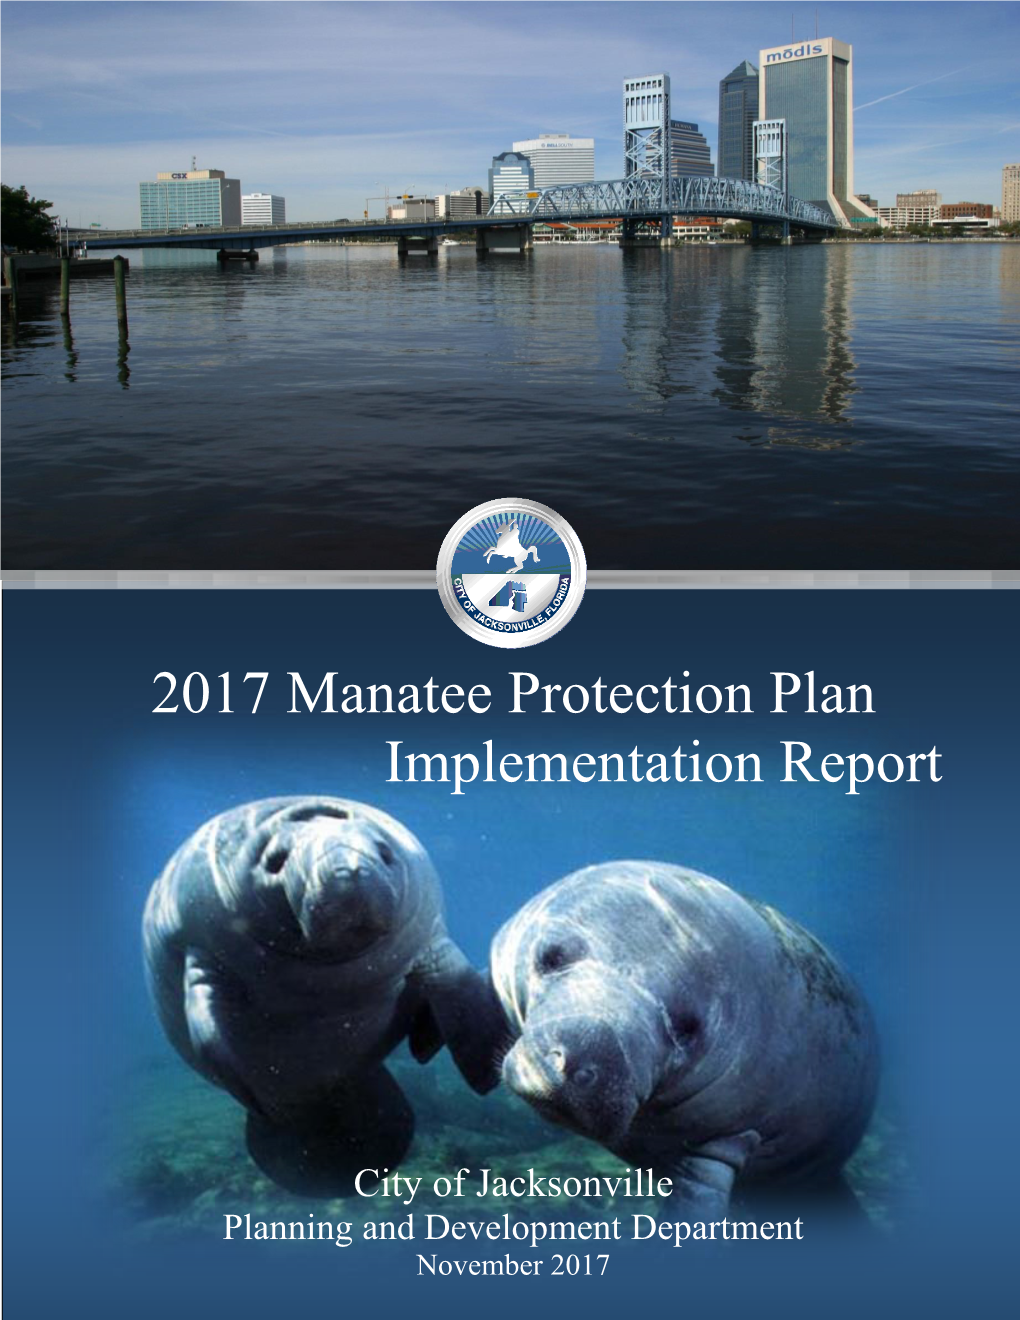 2017 Manatee Protection Plan Implementation Report That Reflects on the City of Jacksonville’S Efforts Towards Protecting Manatees in Duval County